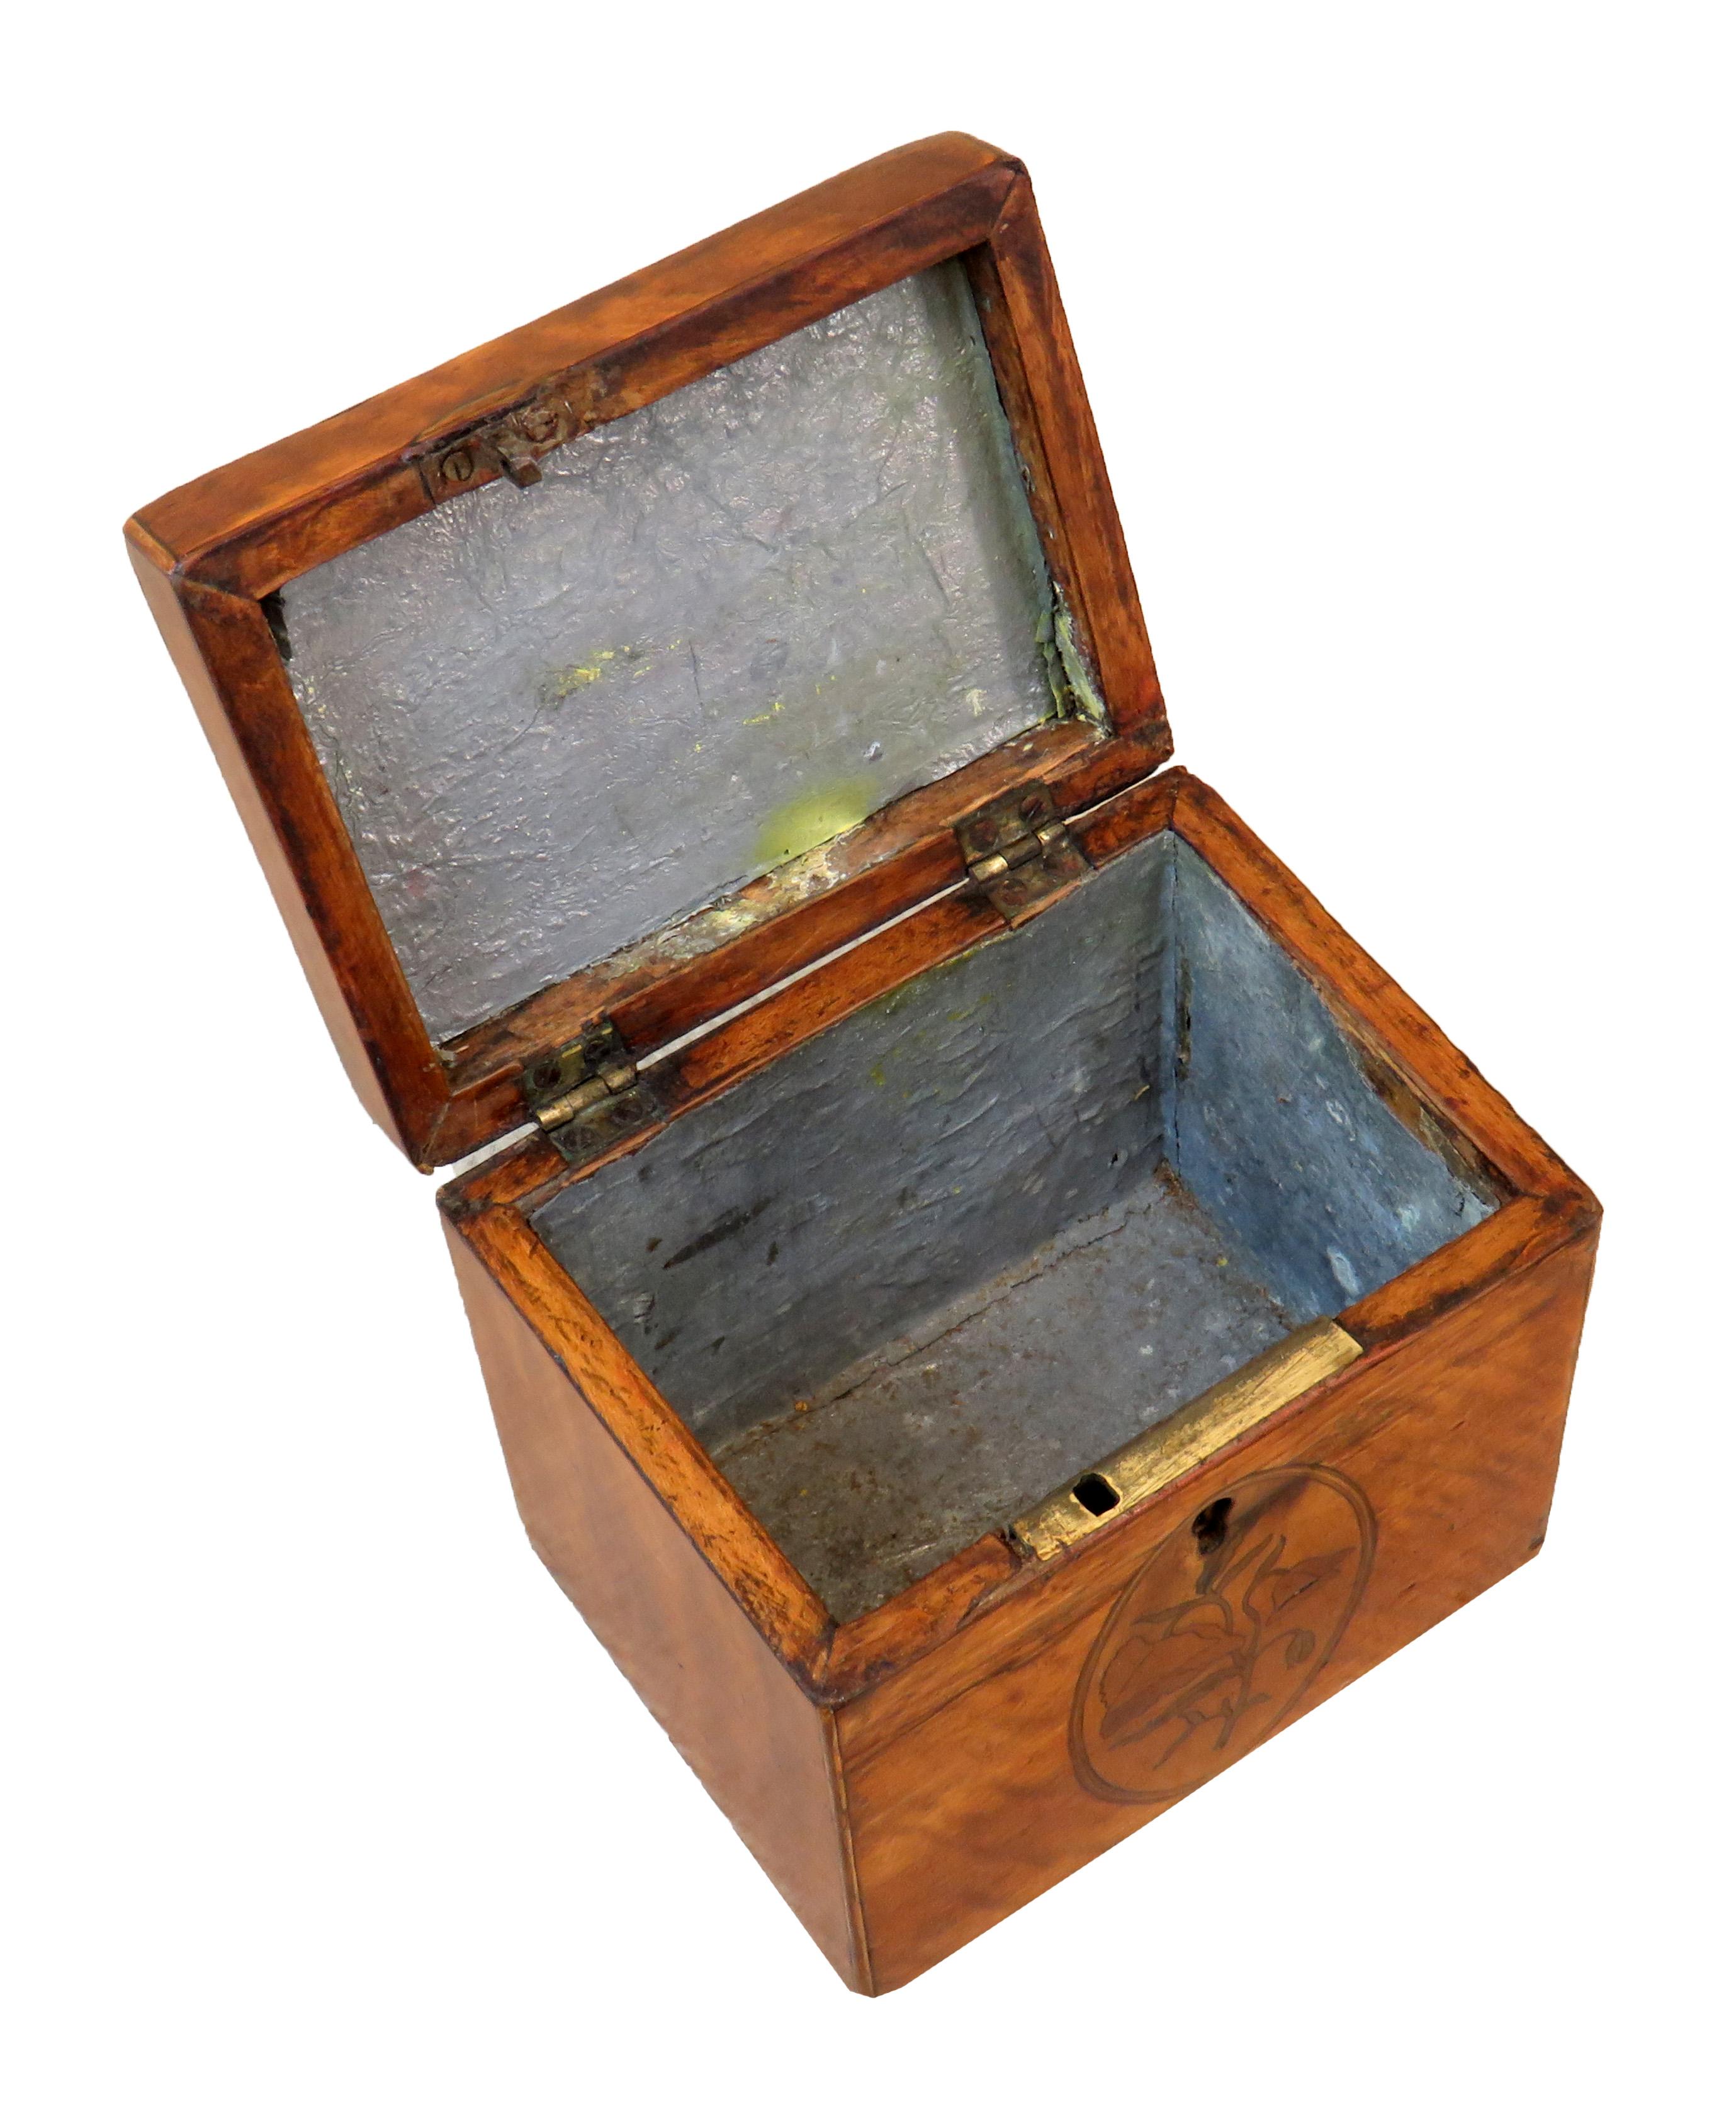 An attractive George III period satinwood oblong tea
caddy having original inlaid decoration and original
foil lined interior.

(Tea was a precious commodity in the 18th century and 
tea caddies were used to both preserve the tea leaves,
but